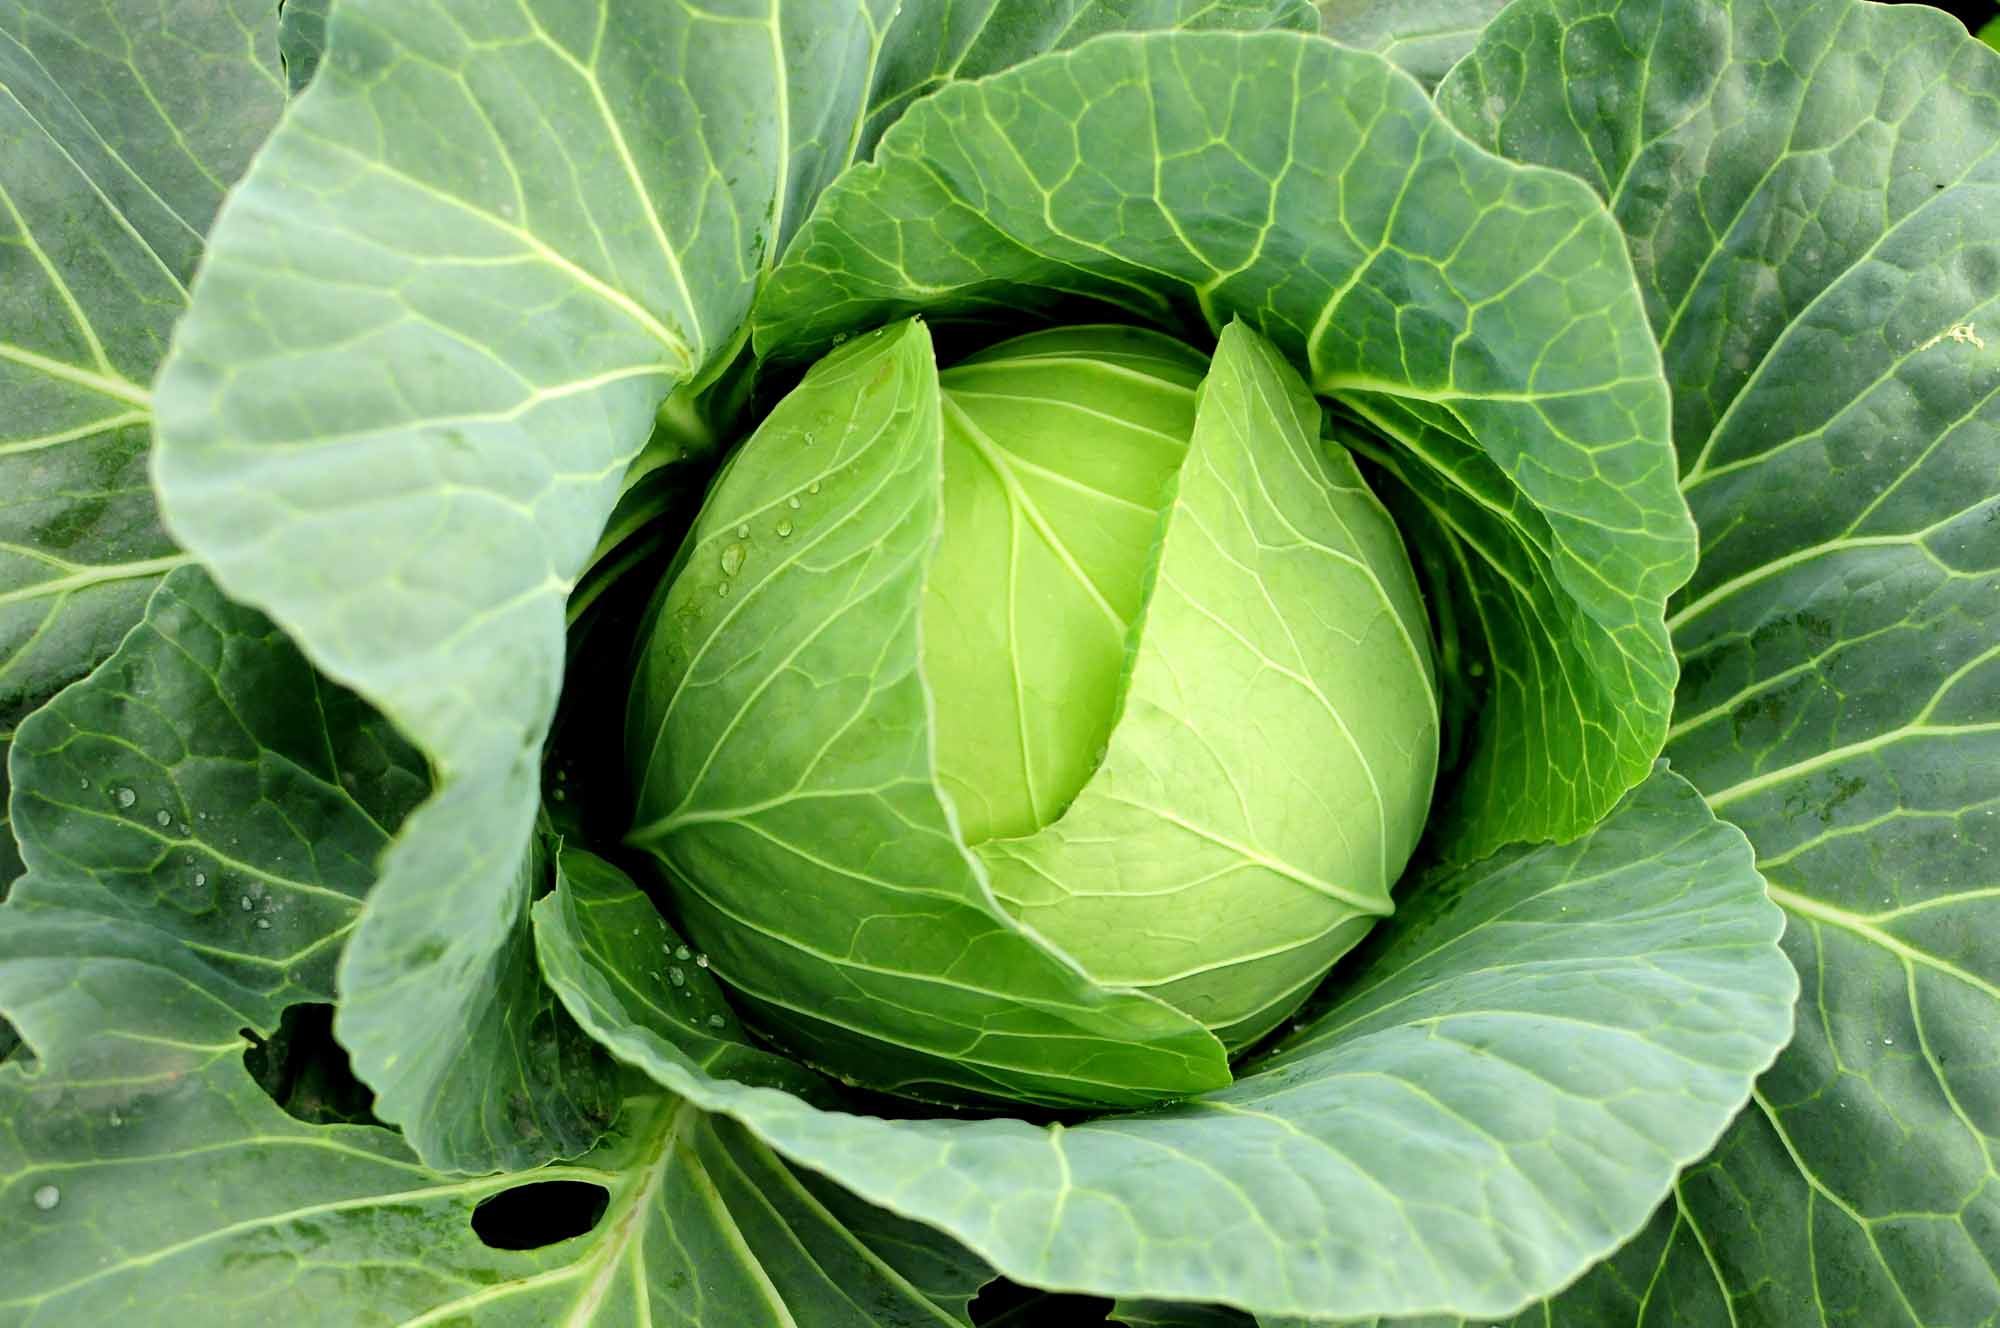 What types of cabbage are there?